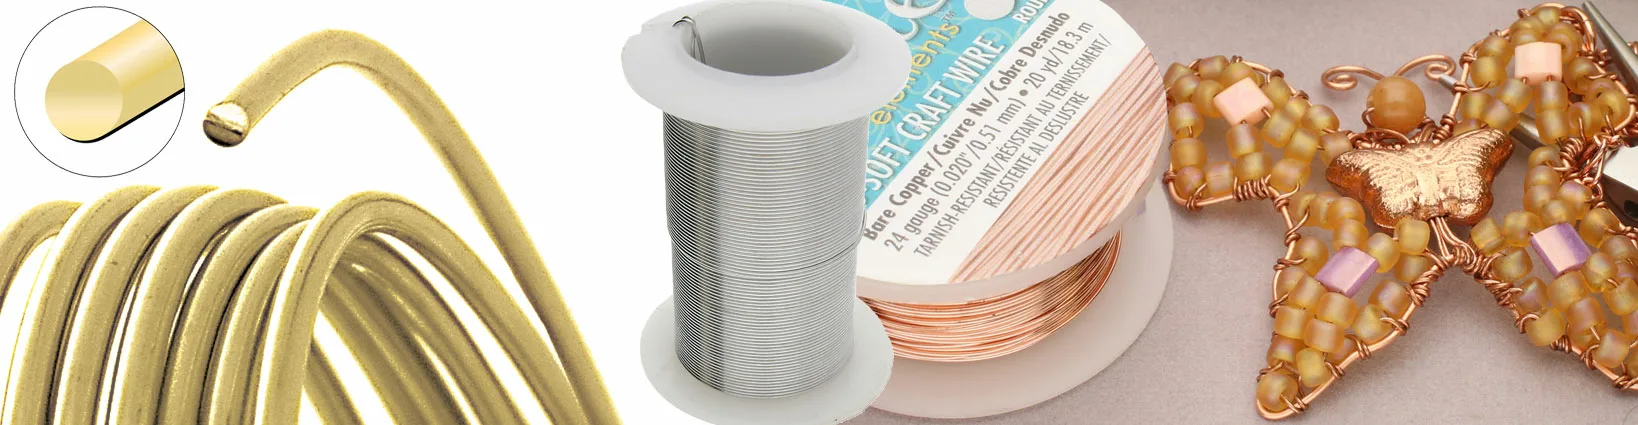 stainless steel wire, jewelry wire, bead smith, 20 gauge, steel wire, craft  wire, non tarnish, 10